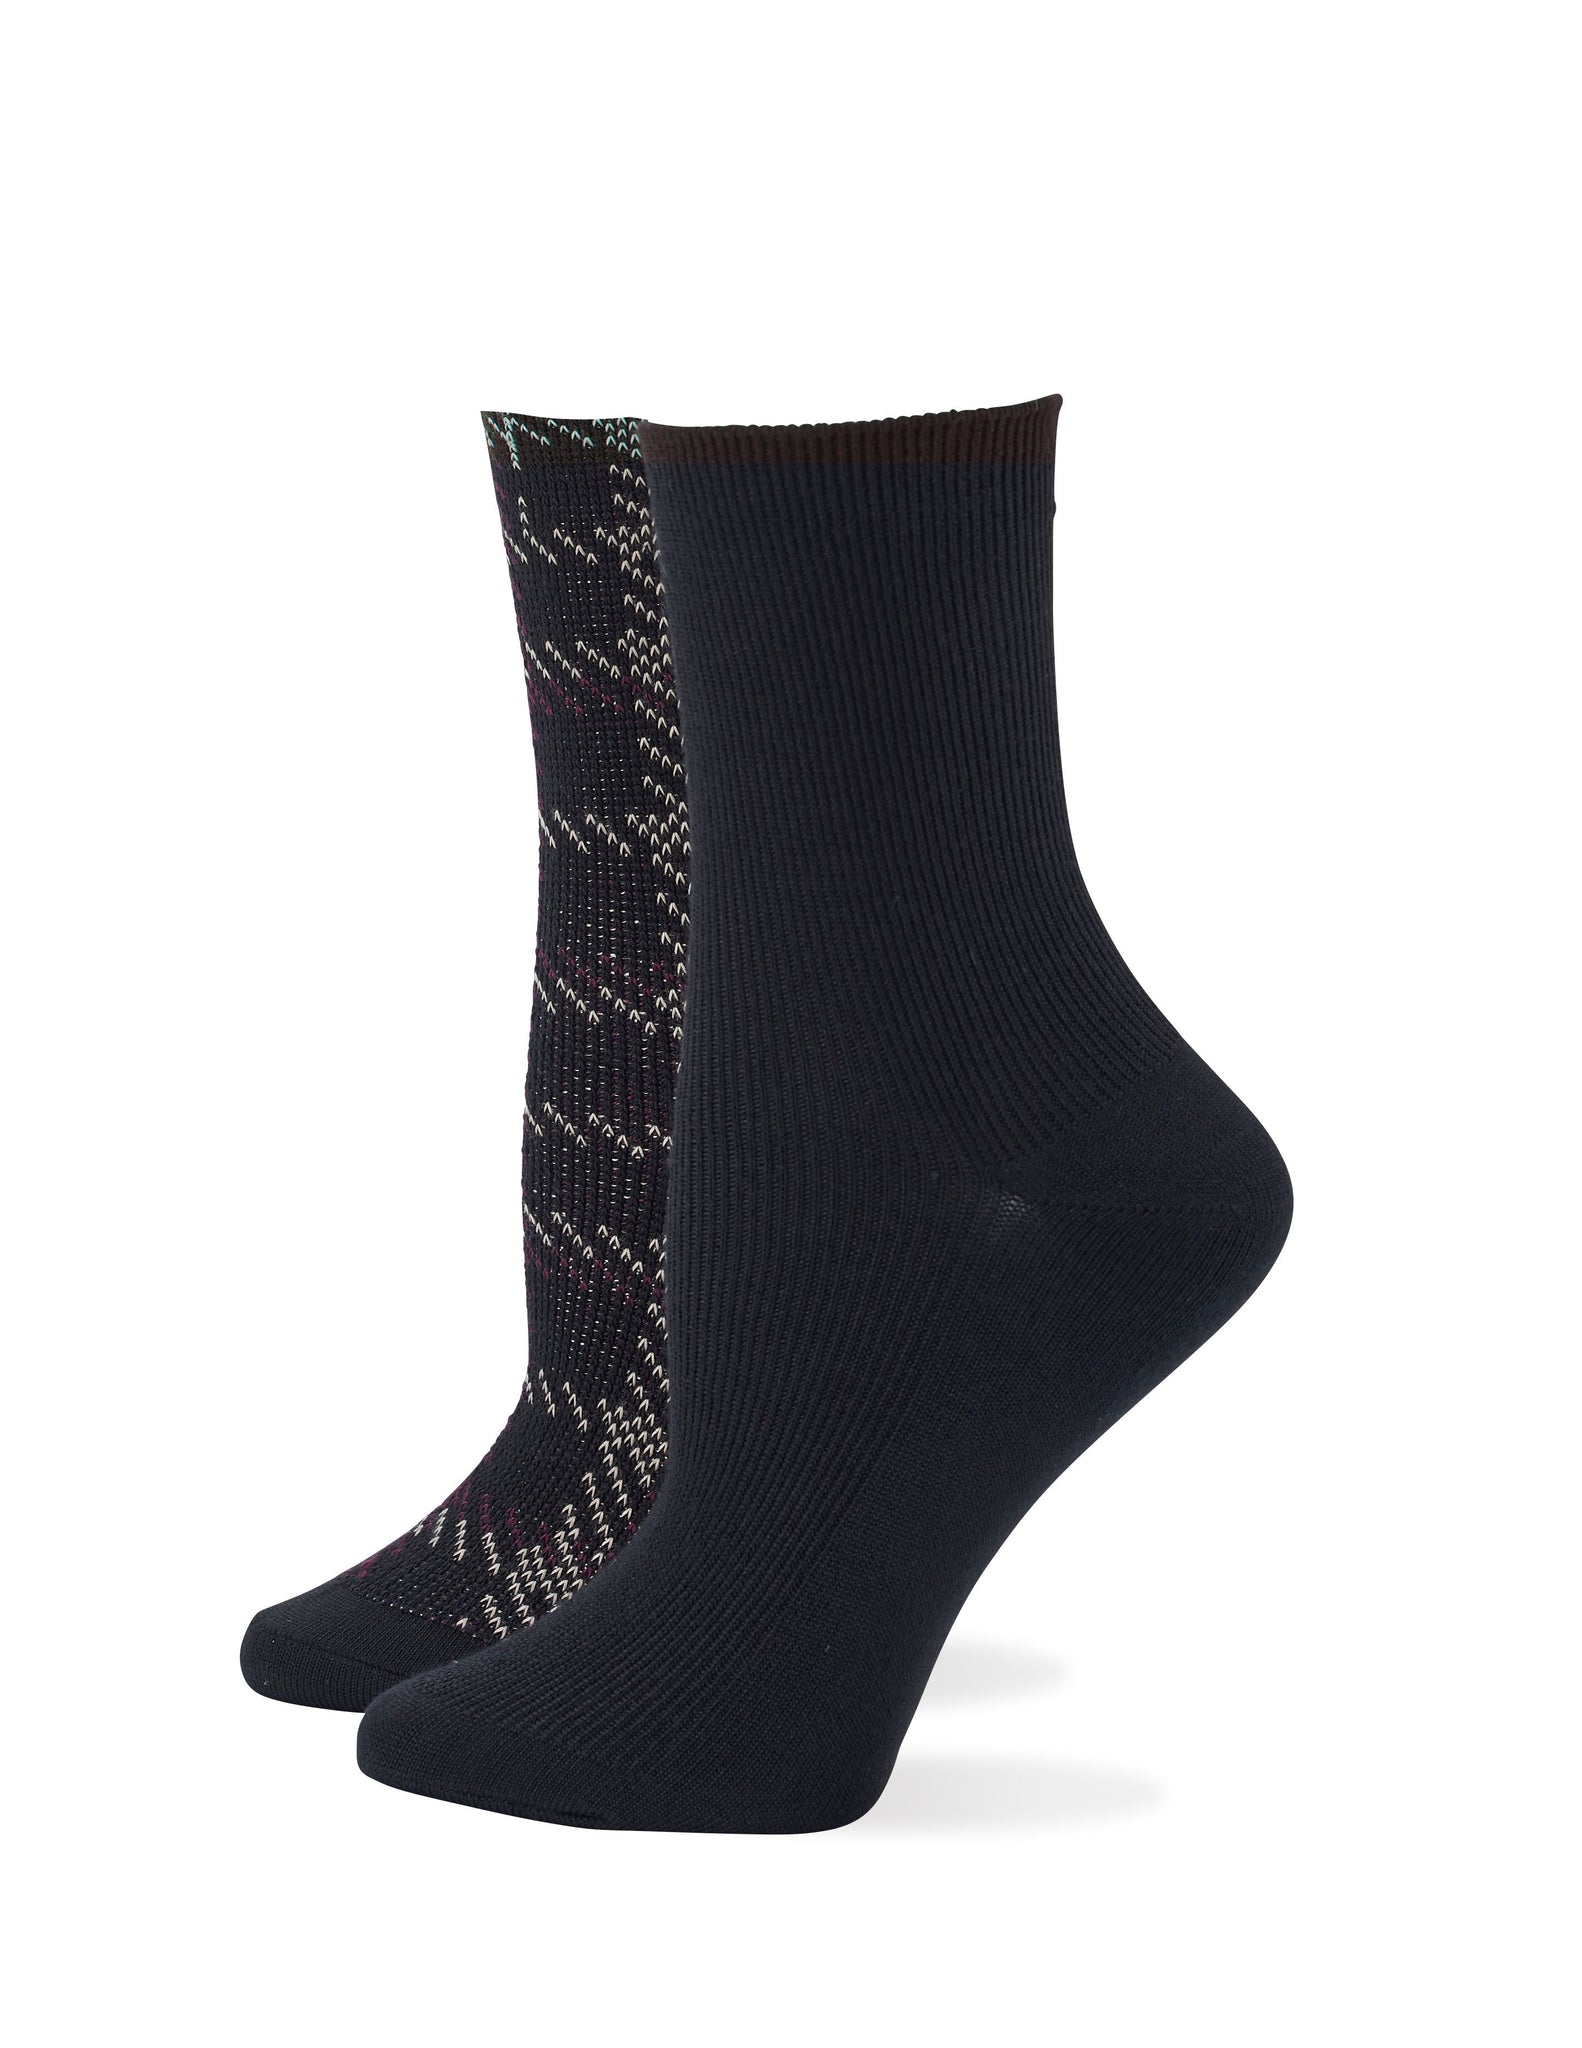 HUE Wintersoft Boot Sock 2 Pack